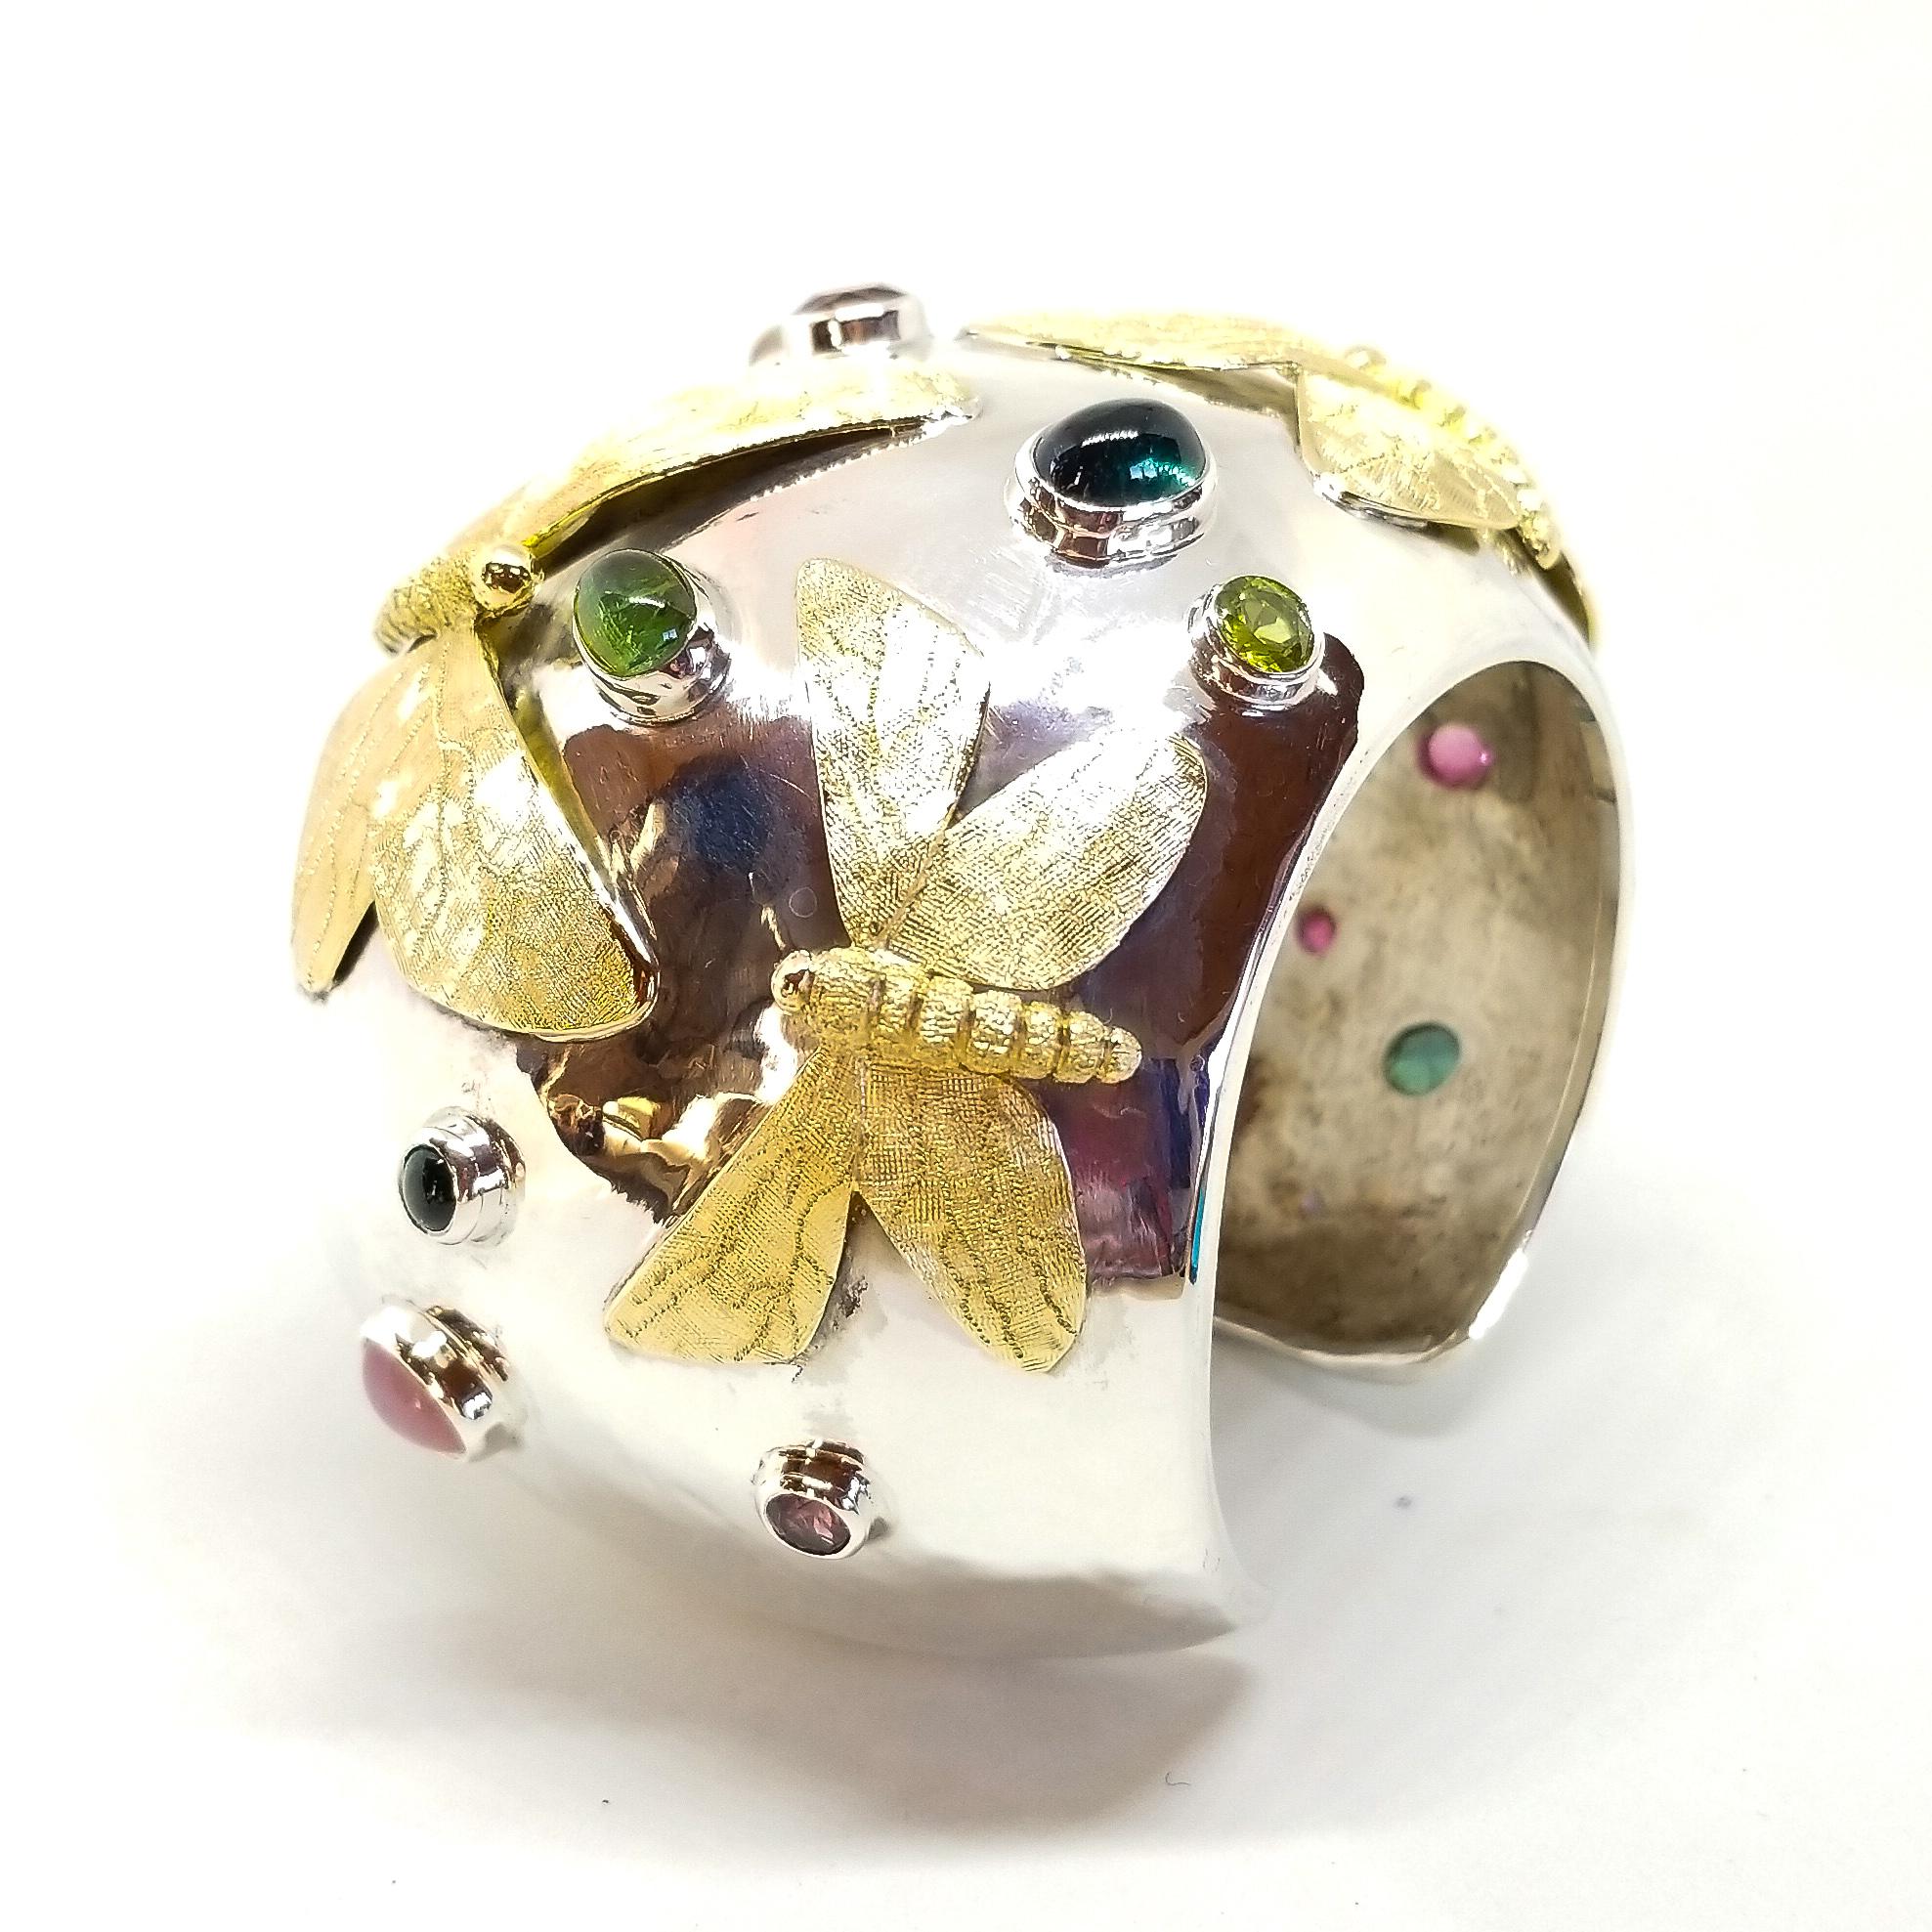 Tom Castor Collection One of a Kind 25 Carat Pink & Green Moth Cuff For Sale 3